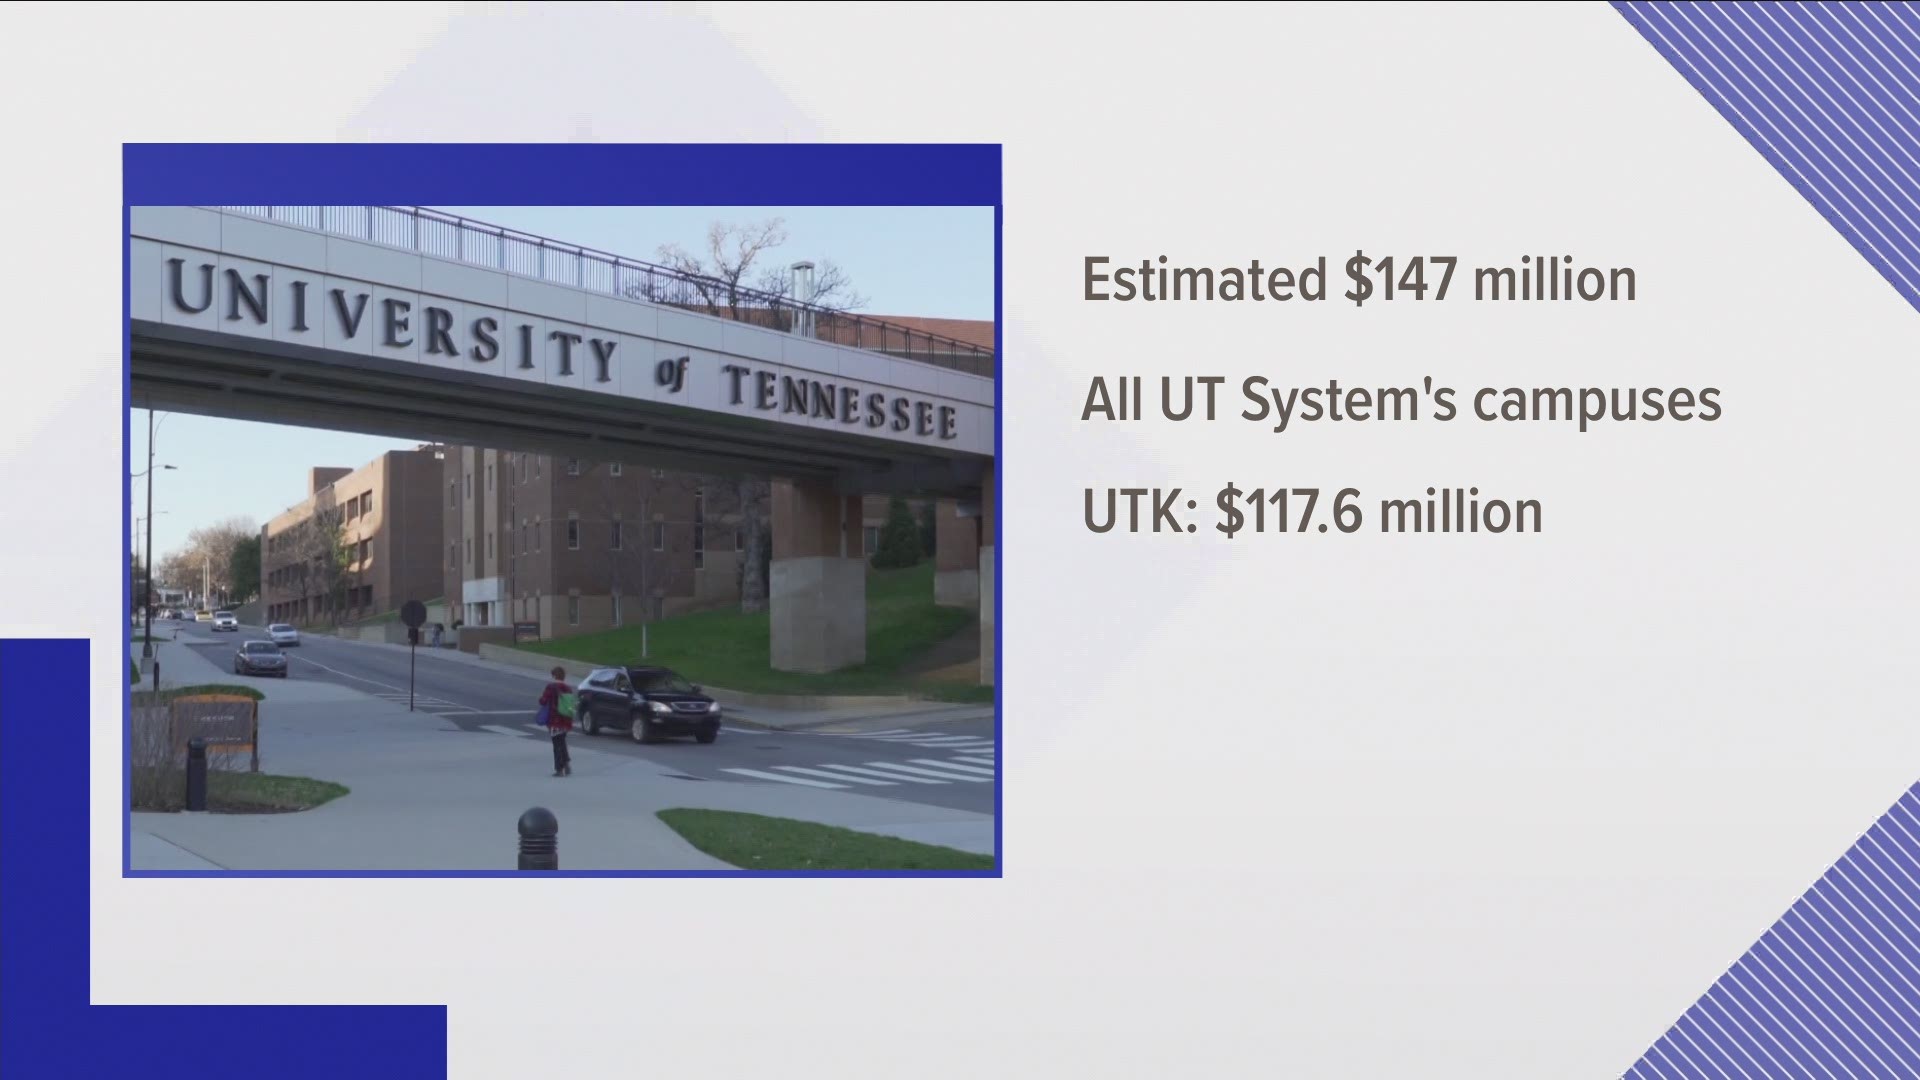 The Board of Trustees said the pandemic will cost the UT System an estimated $147 million.